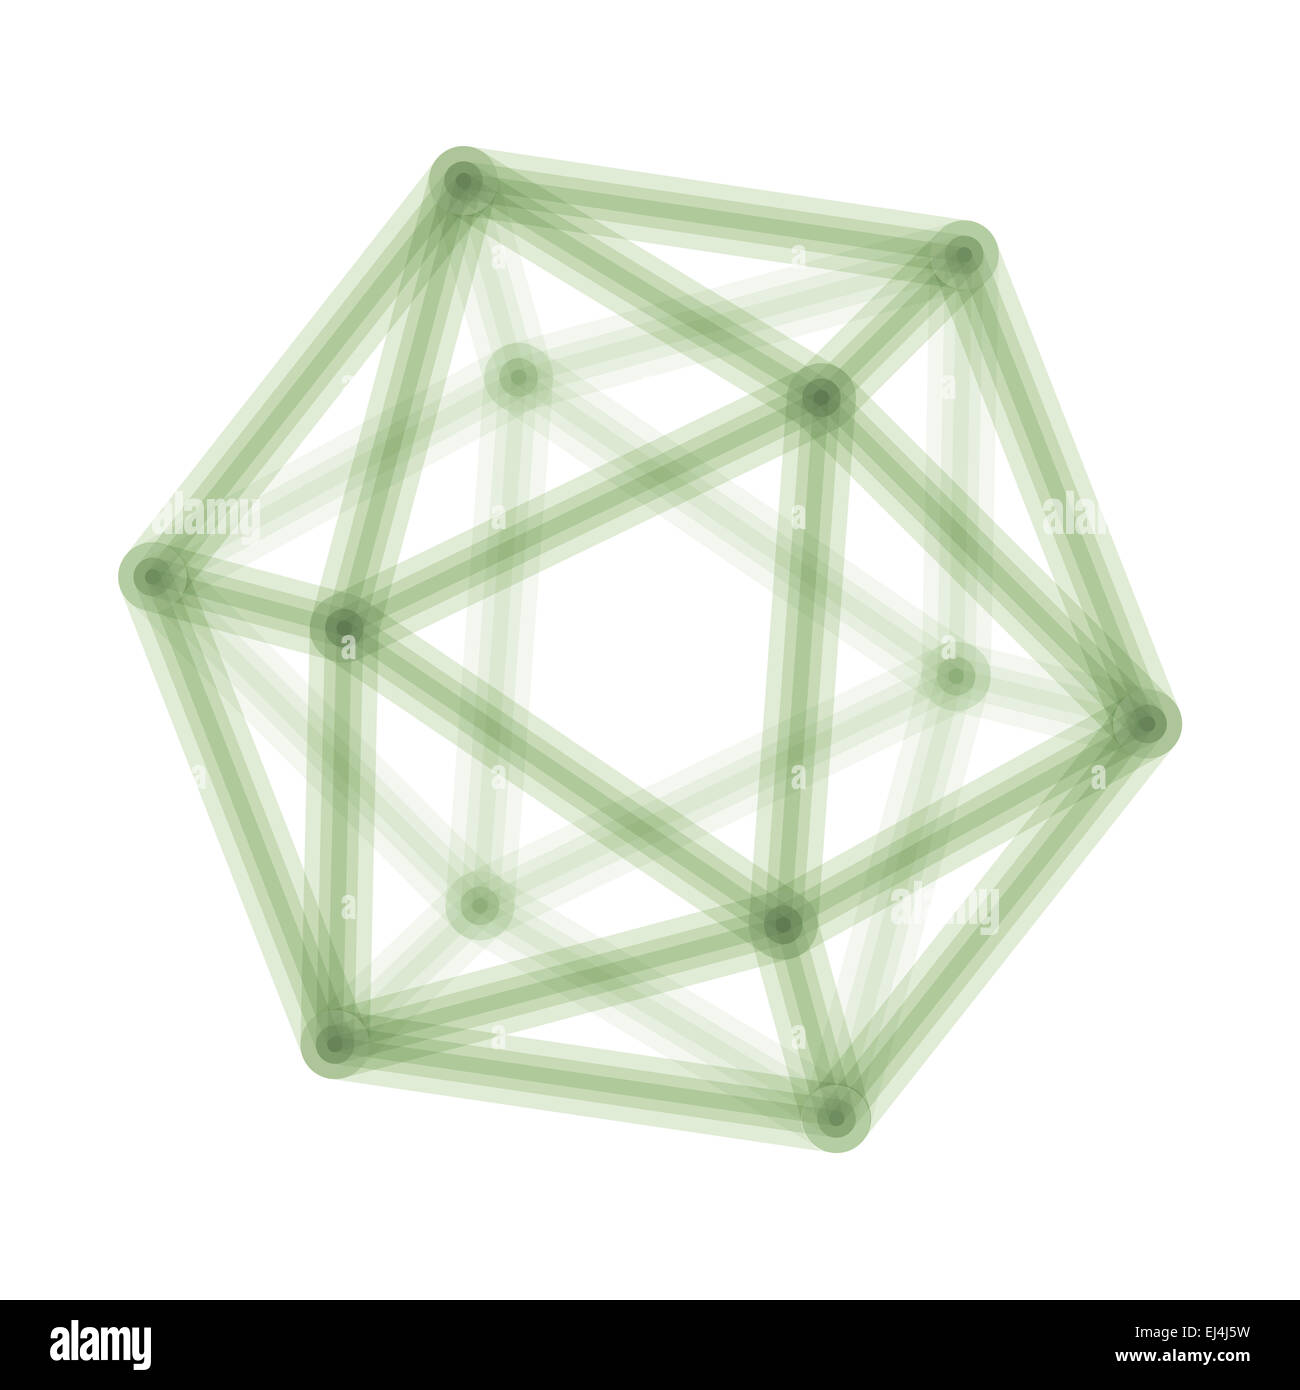 icosahedron's edges connected in overlapping transparency Stock Photo